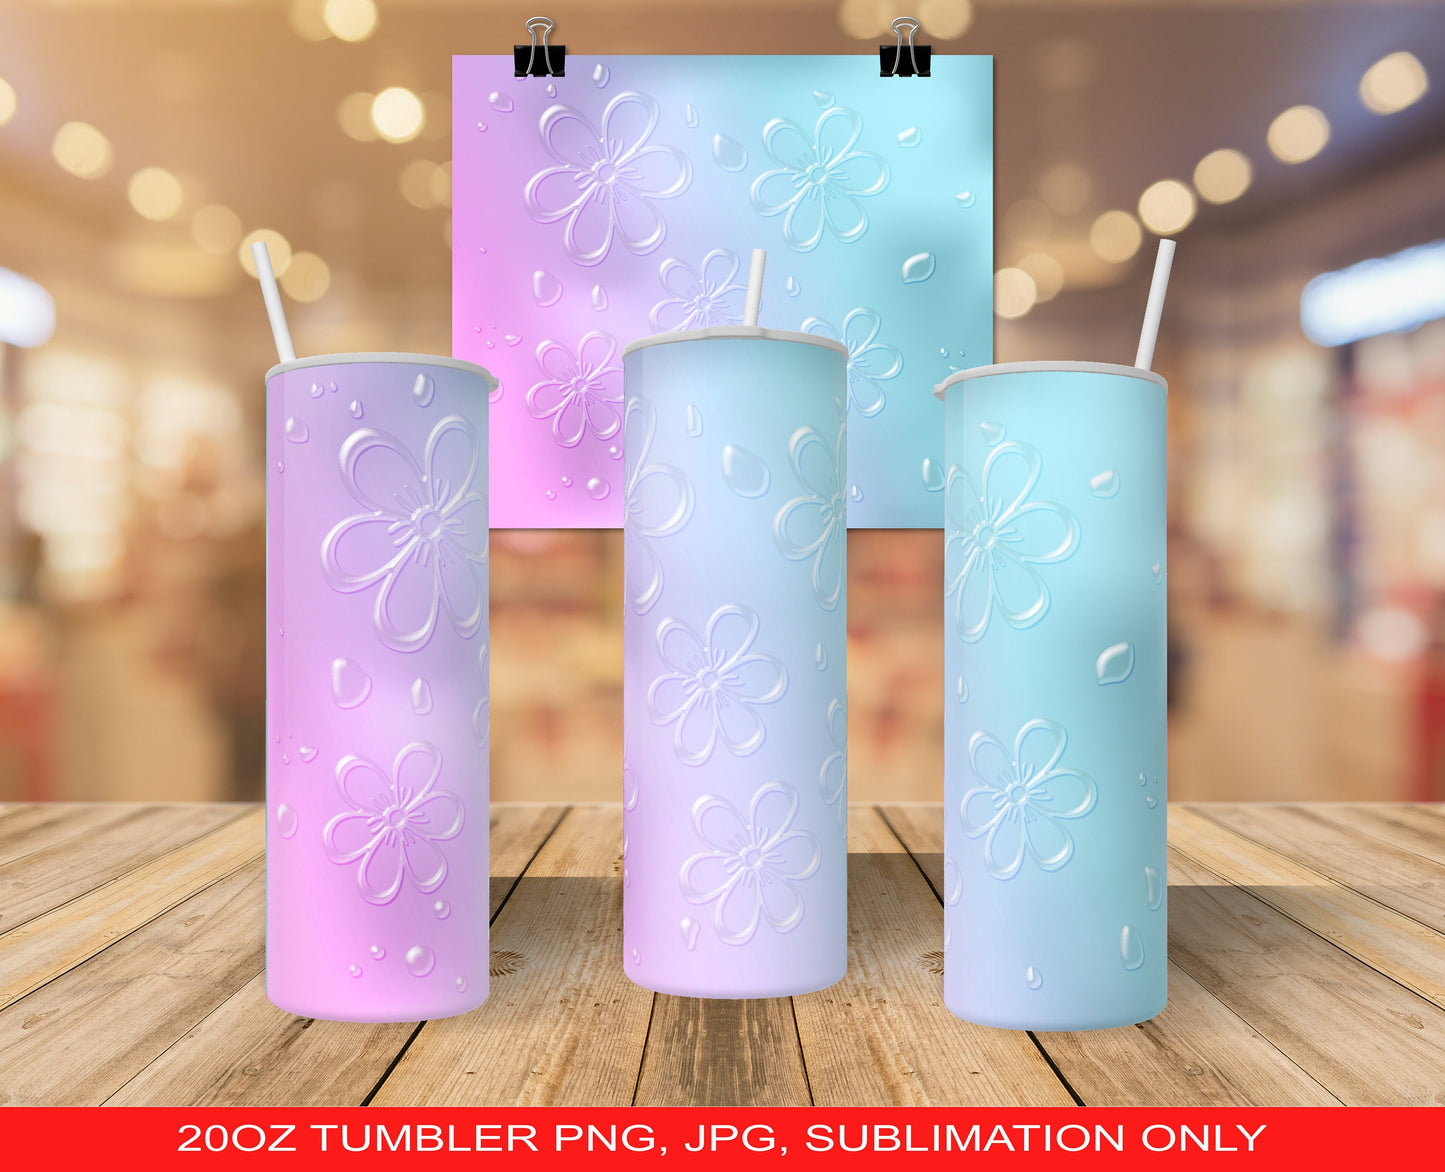 Raindrop Flowers 20oz Tumbler PNG and JPG ONLY